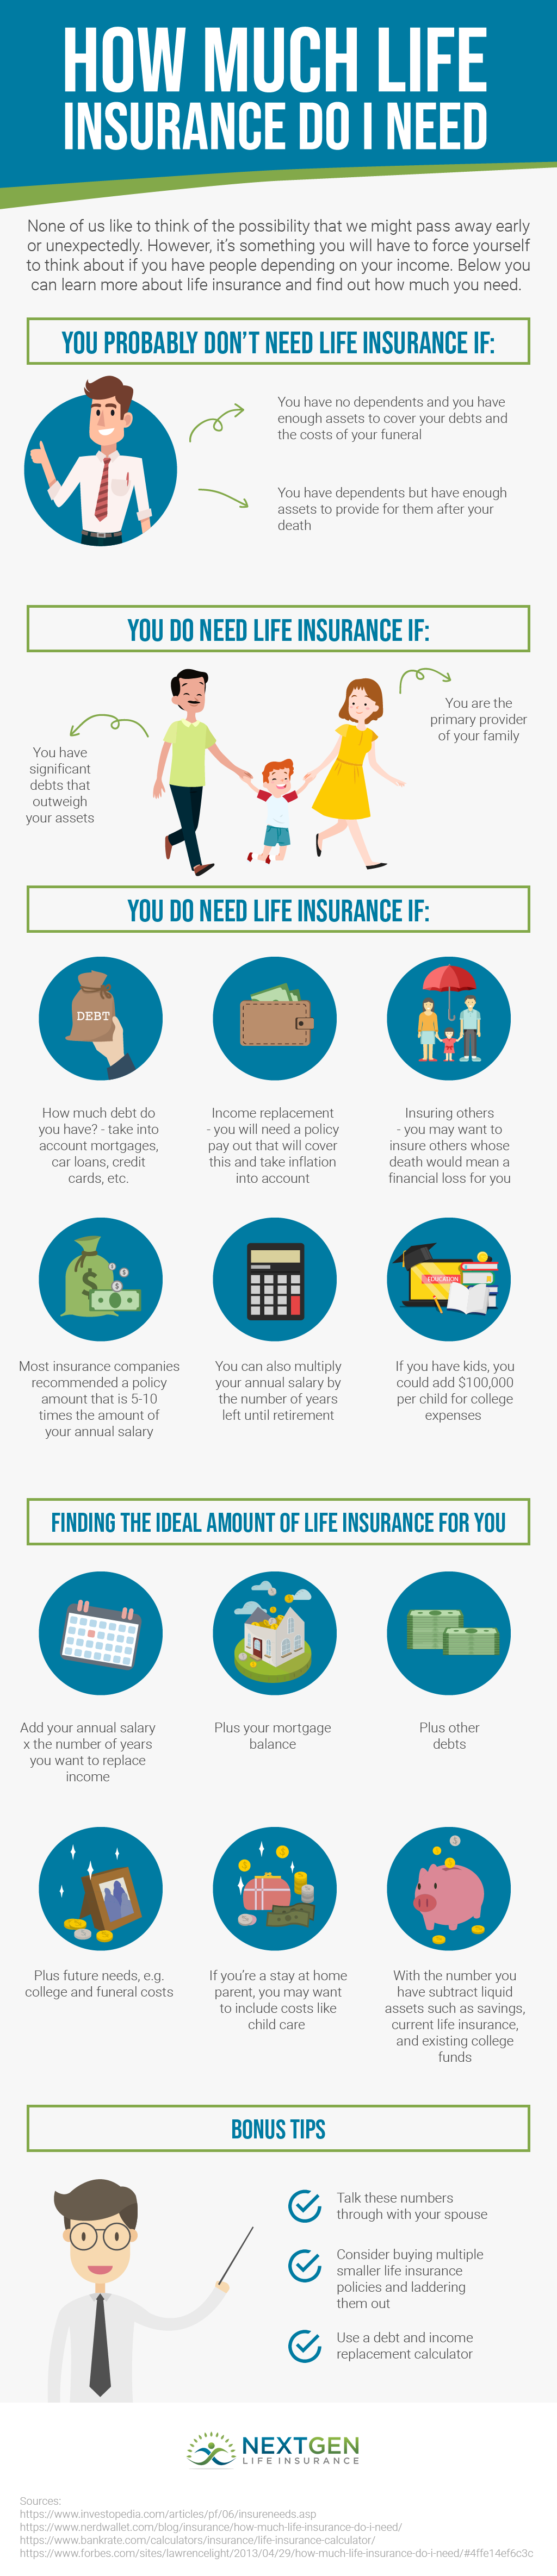 How Much Life Insurance Do I Need Infographic